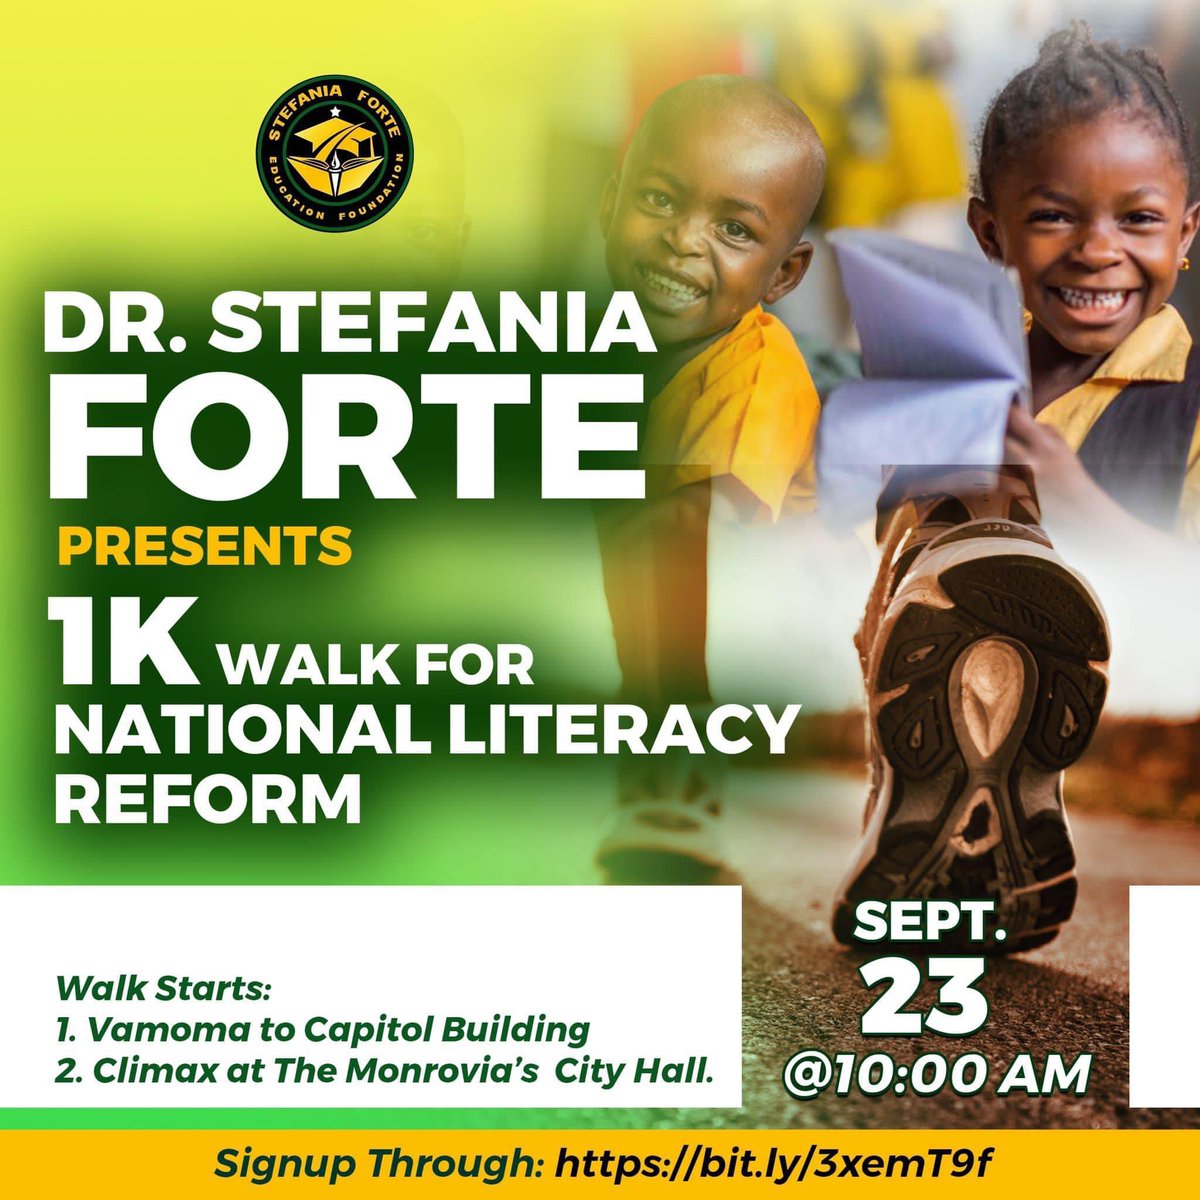 #Liberia is considered an illiterate society by both the #WorldBank and #UNESCO standards. These statistics are worse with women and children in rural Liberia. Join us! Walk for National #Literacy Reform on Sept. 23rd. Sign Up: bit.ly/3xemT9f